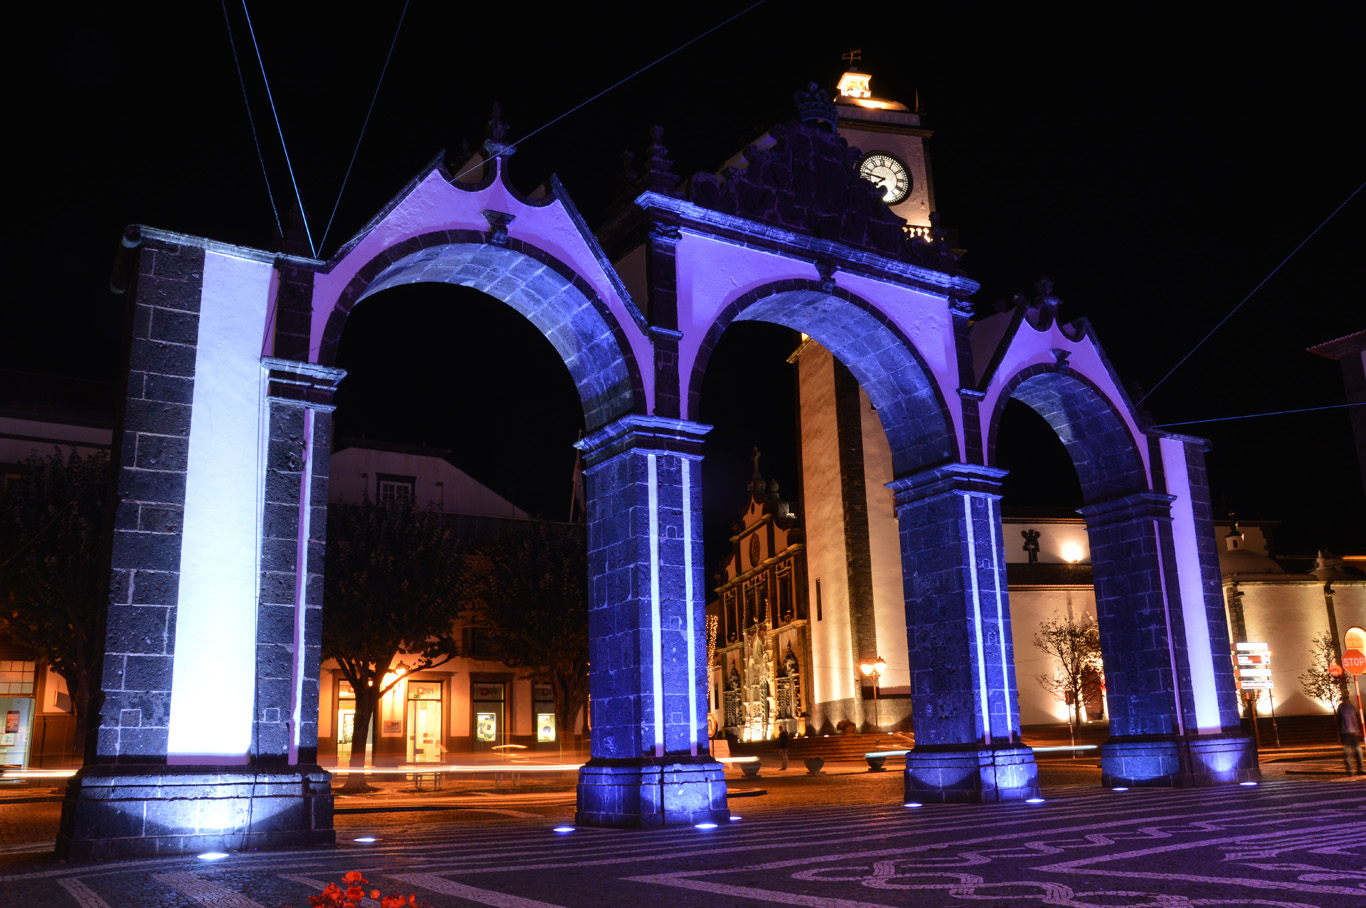 The City Gate at night